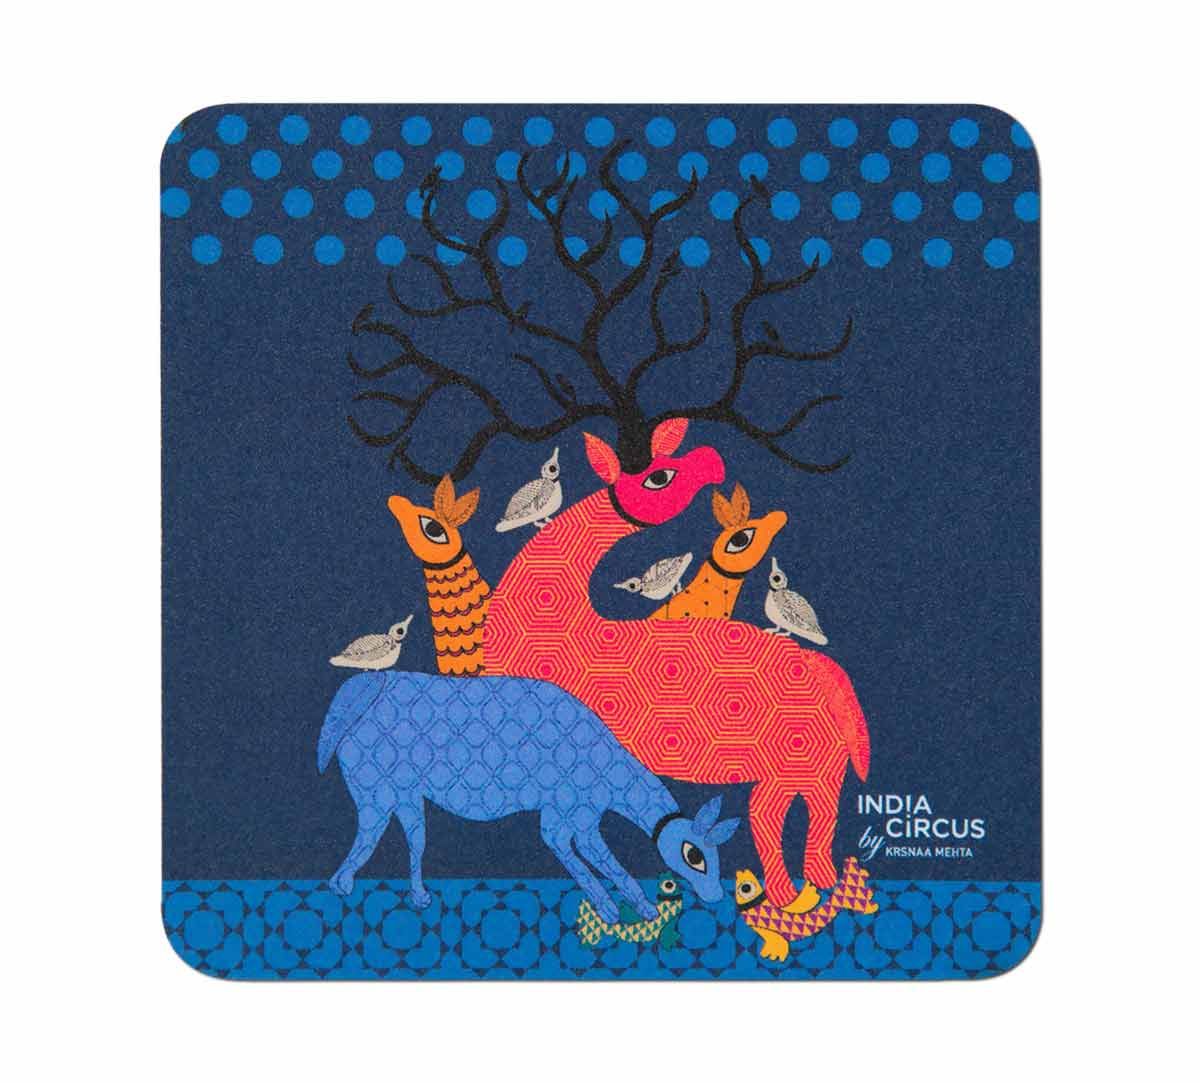 India Circus Artistic Intimacy Table Coaster